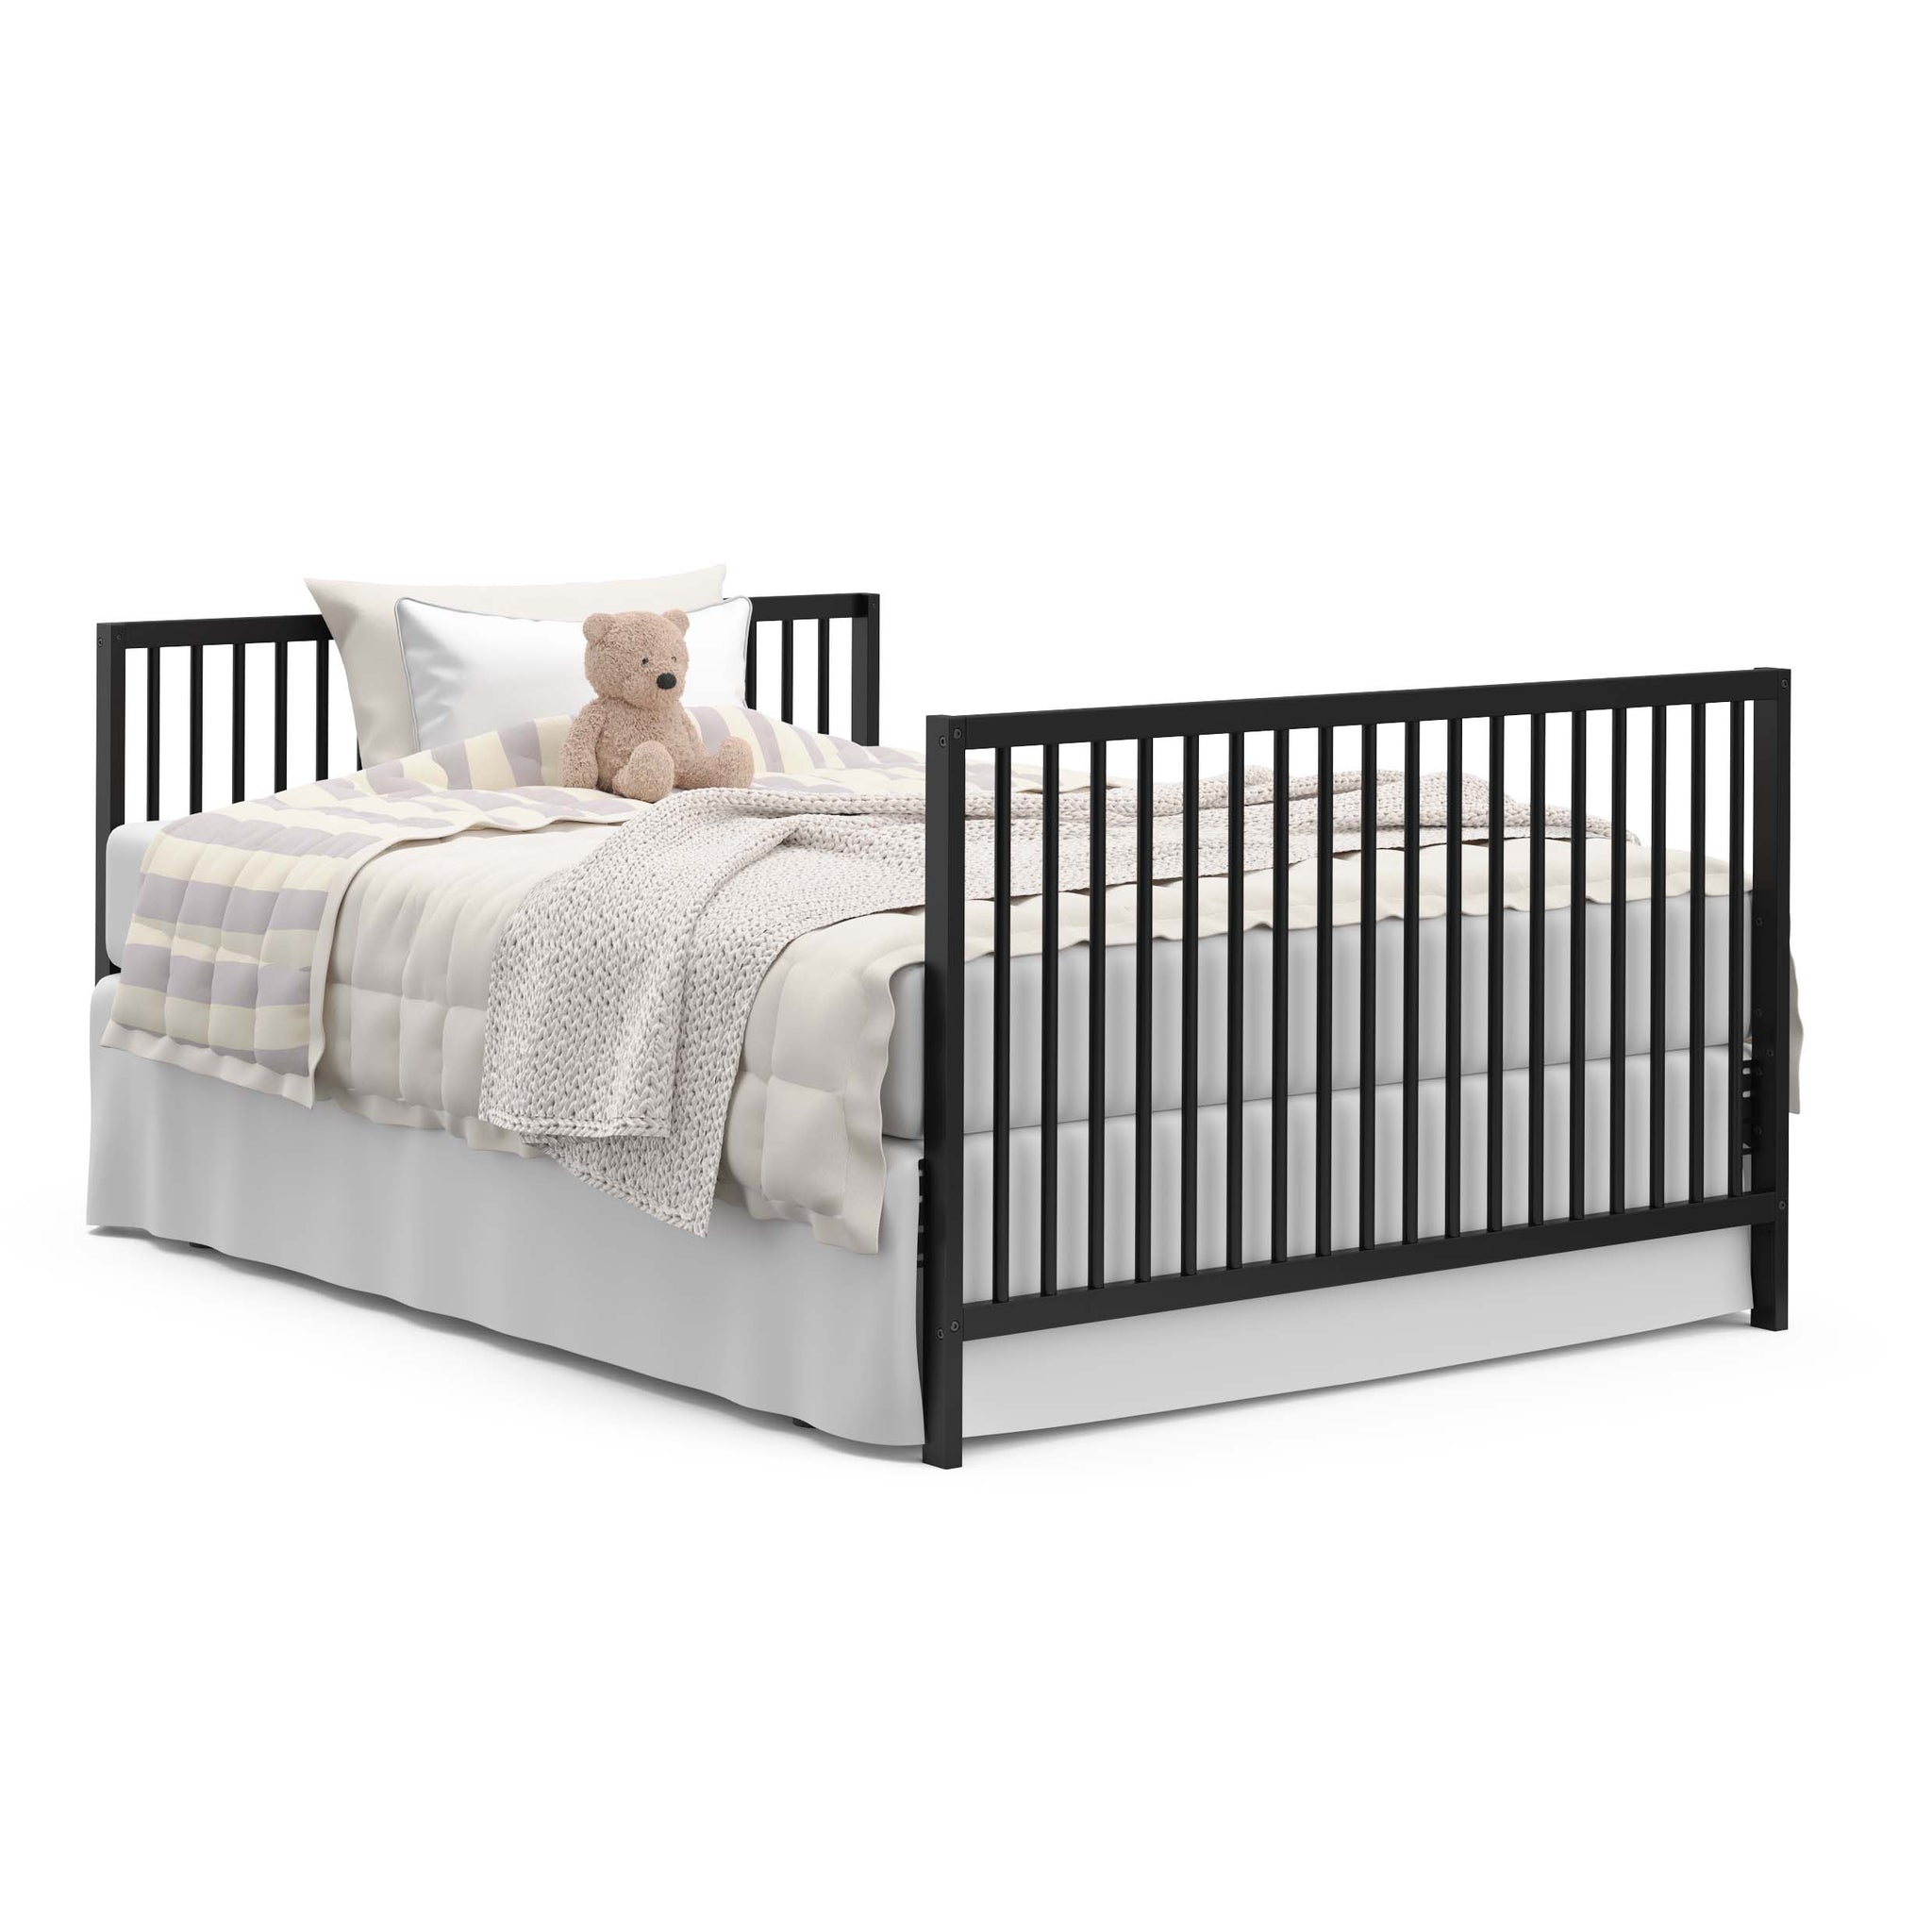 Black crib full-size bed with headboard and footboard conversion